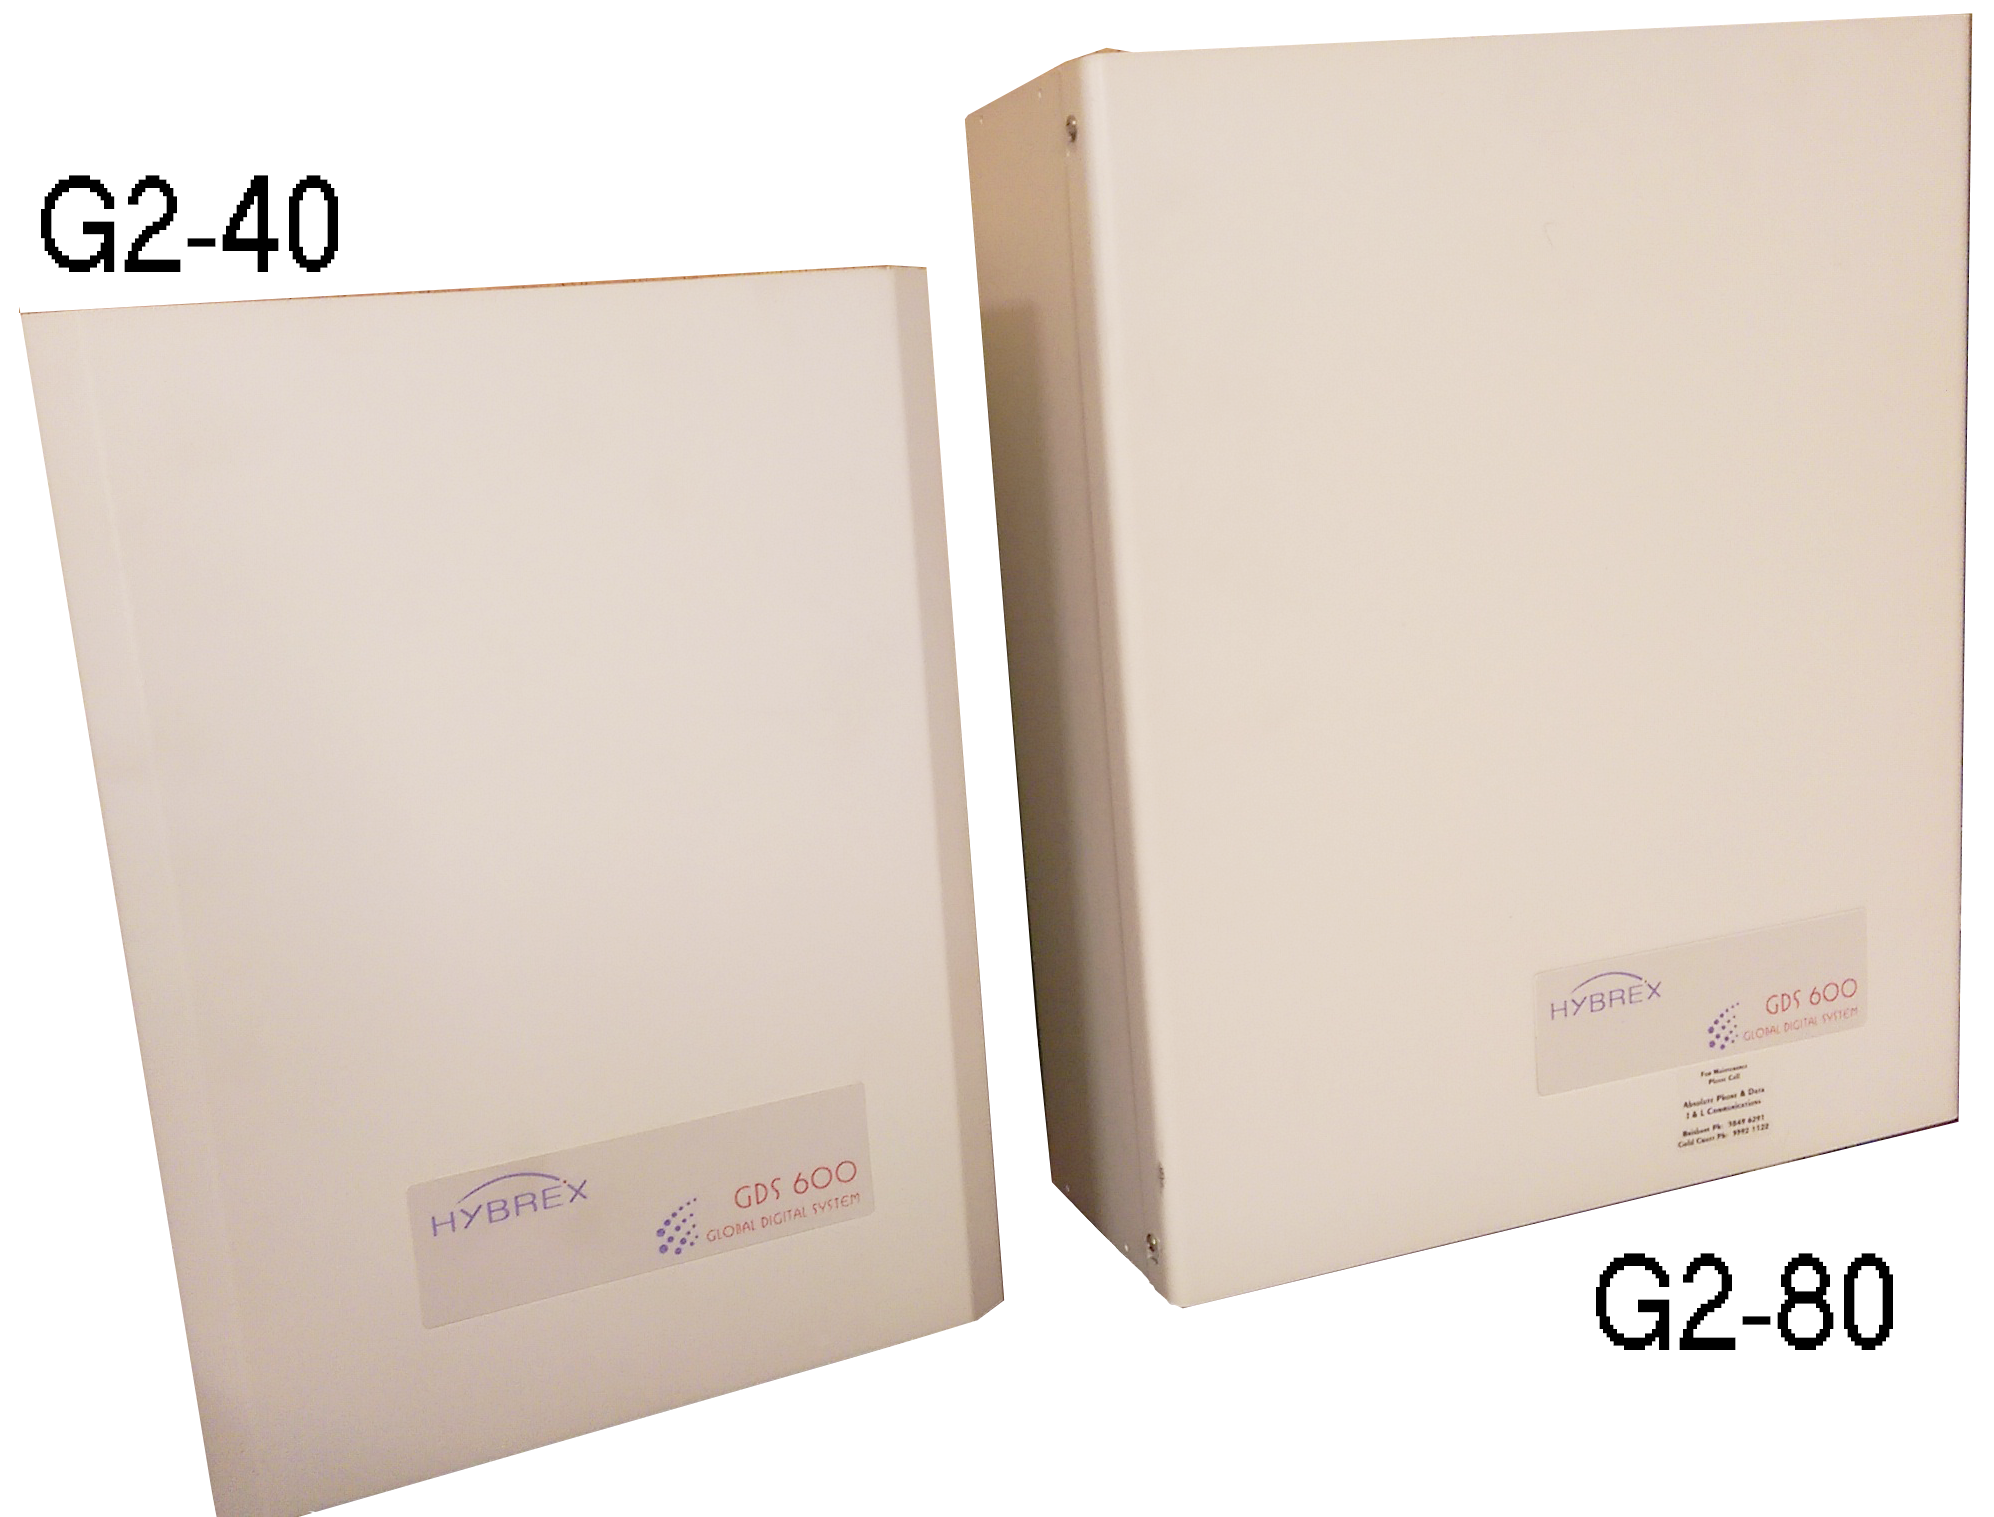 Visual comparison between a g2-40 and a regular 80 port cabinet